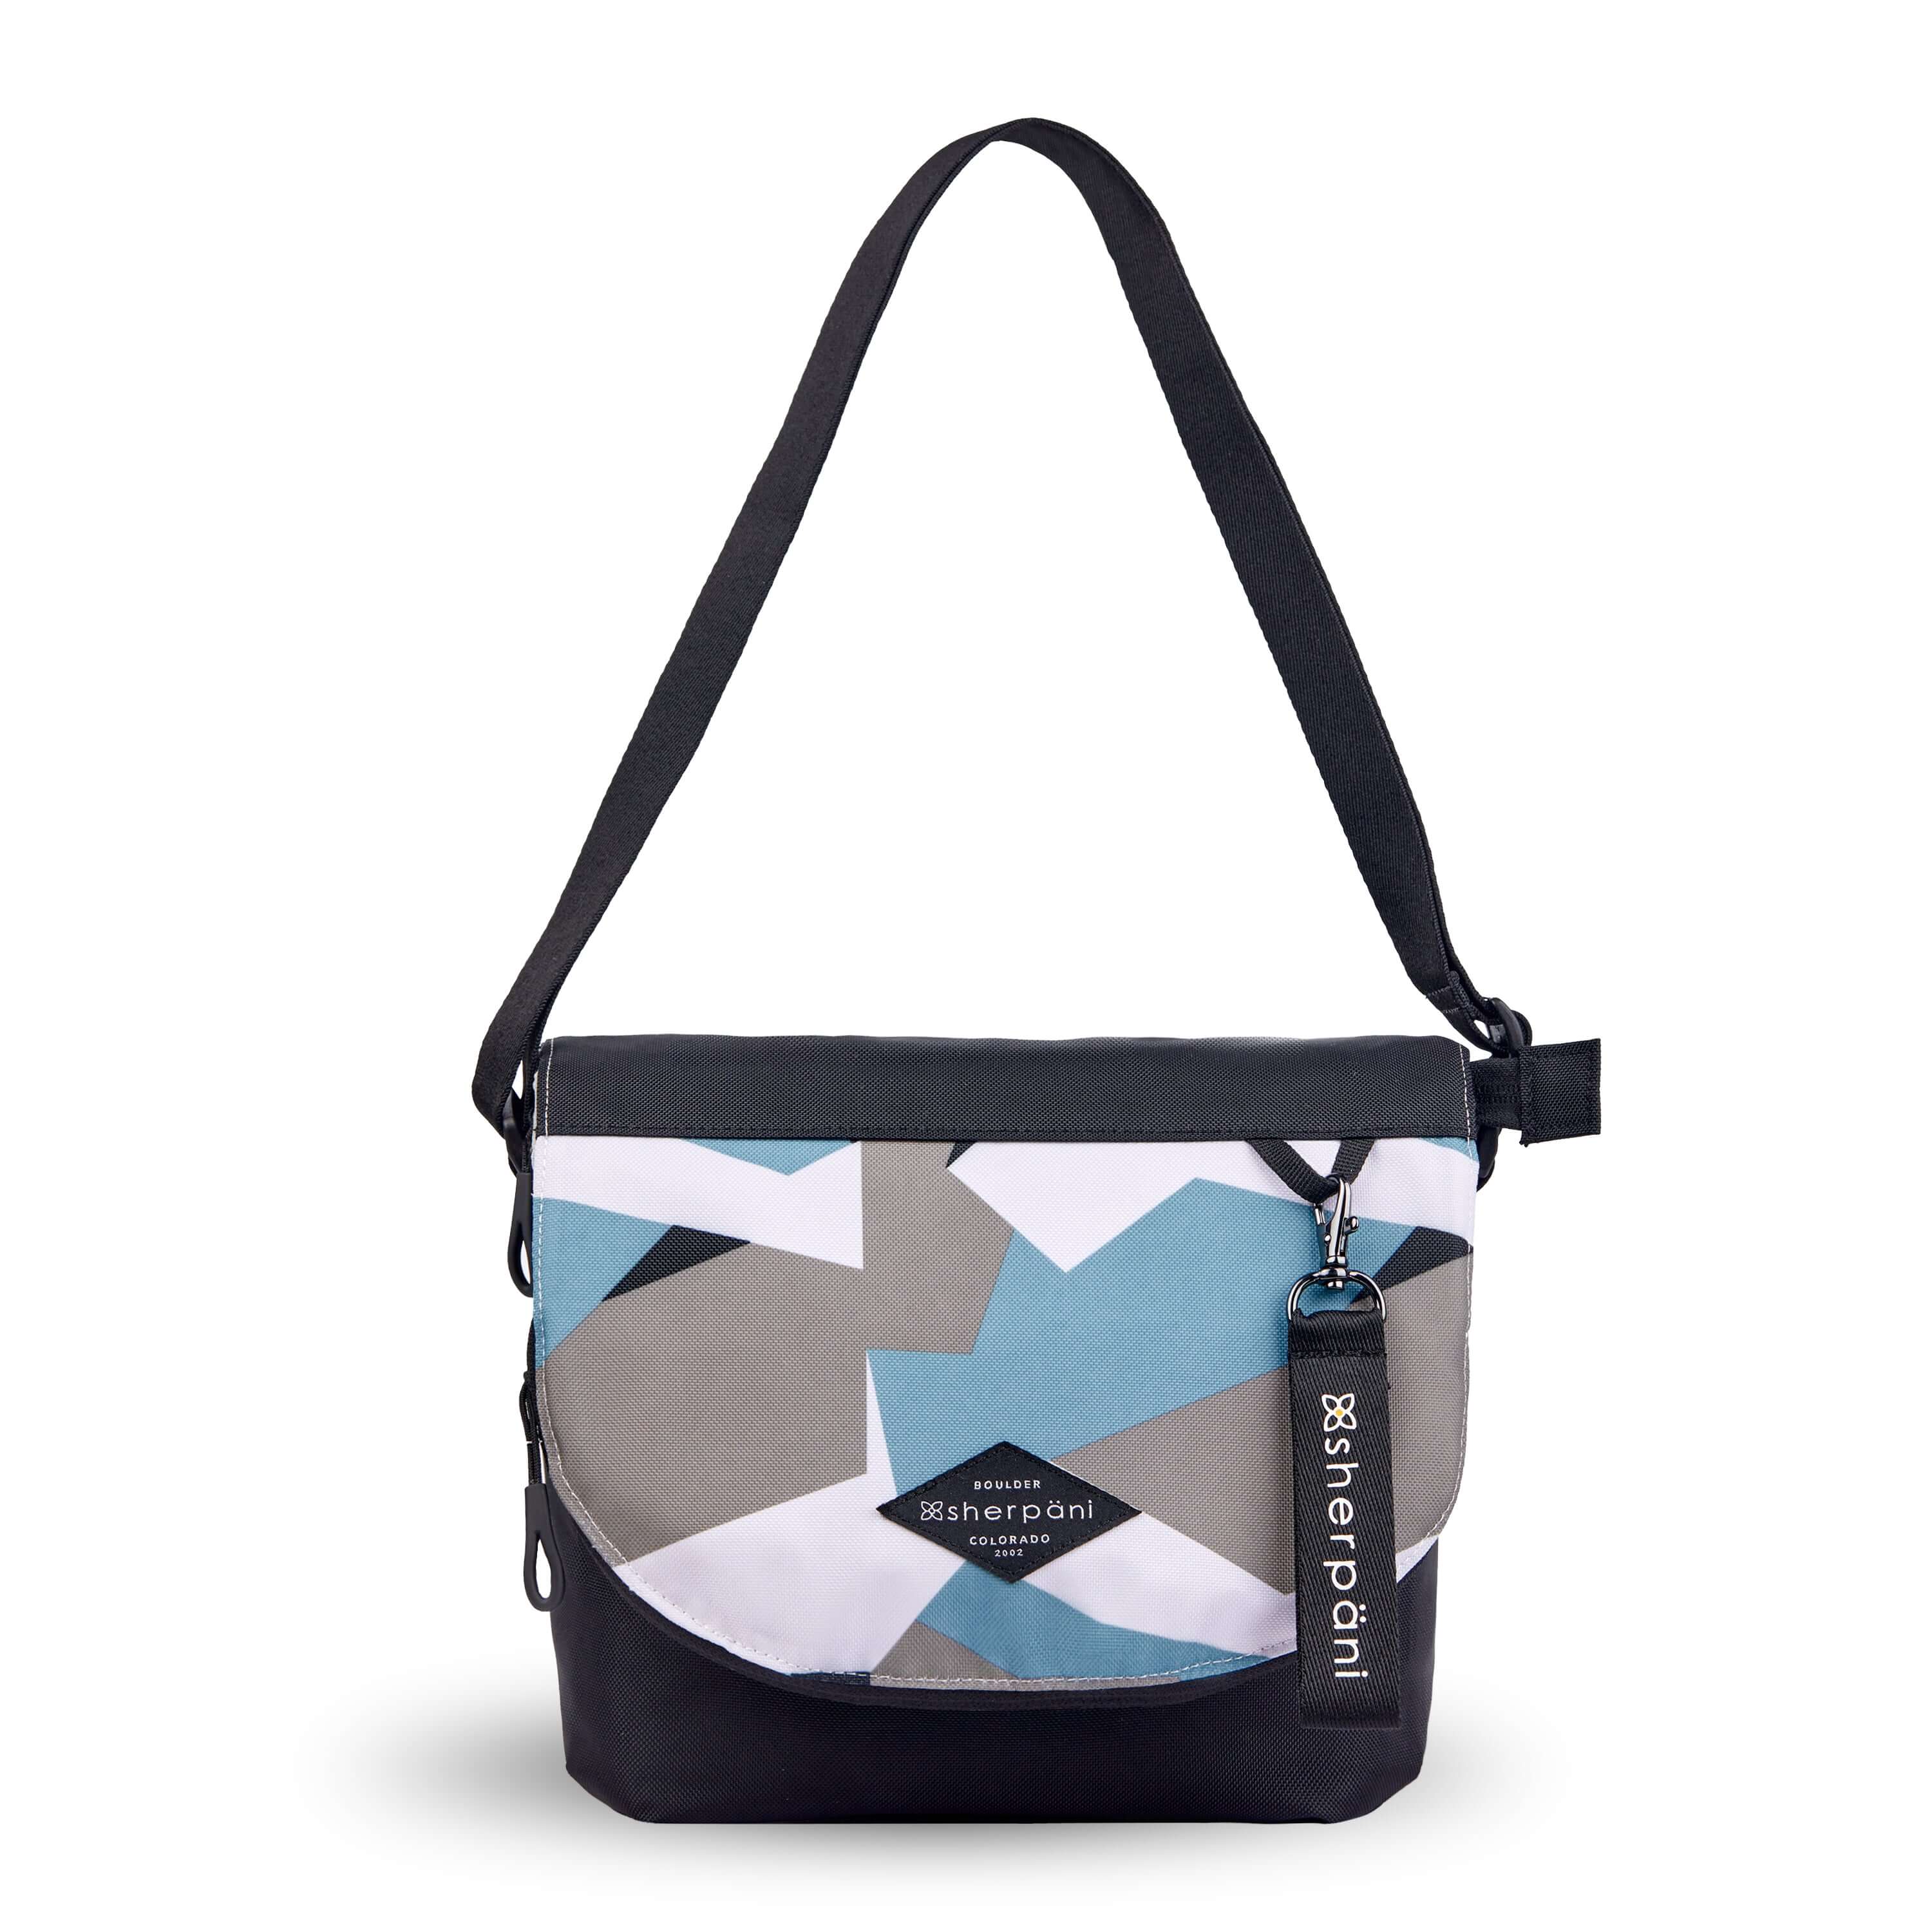 Flat front view of Sherpani crossbody, the Milli in Summer Camo. The messenger style bag is two toned: the layover flap is a camouflage pattern of light blue, gray and white, the remainder of the bag is black. Easy pull zippers are accented in black. The bag has an adjustable crossbody strap. A branded Sherpani keychain is clipped to a fabric loop in the upper right corner. 